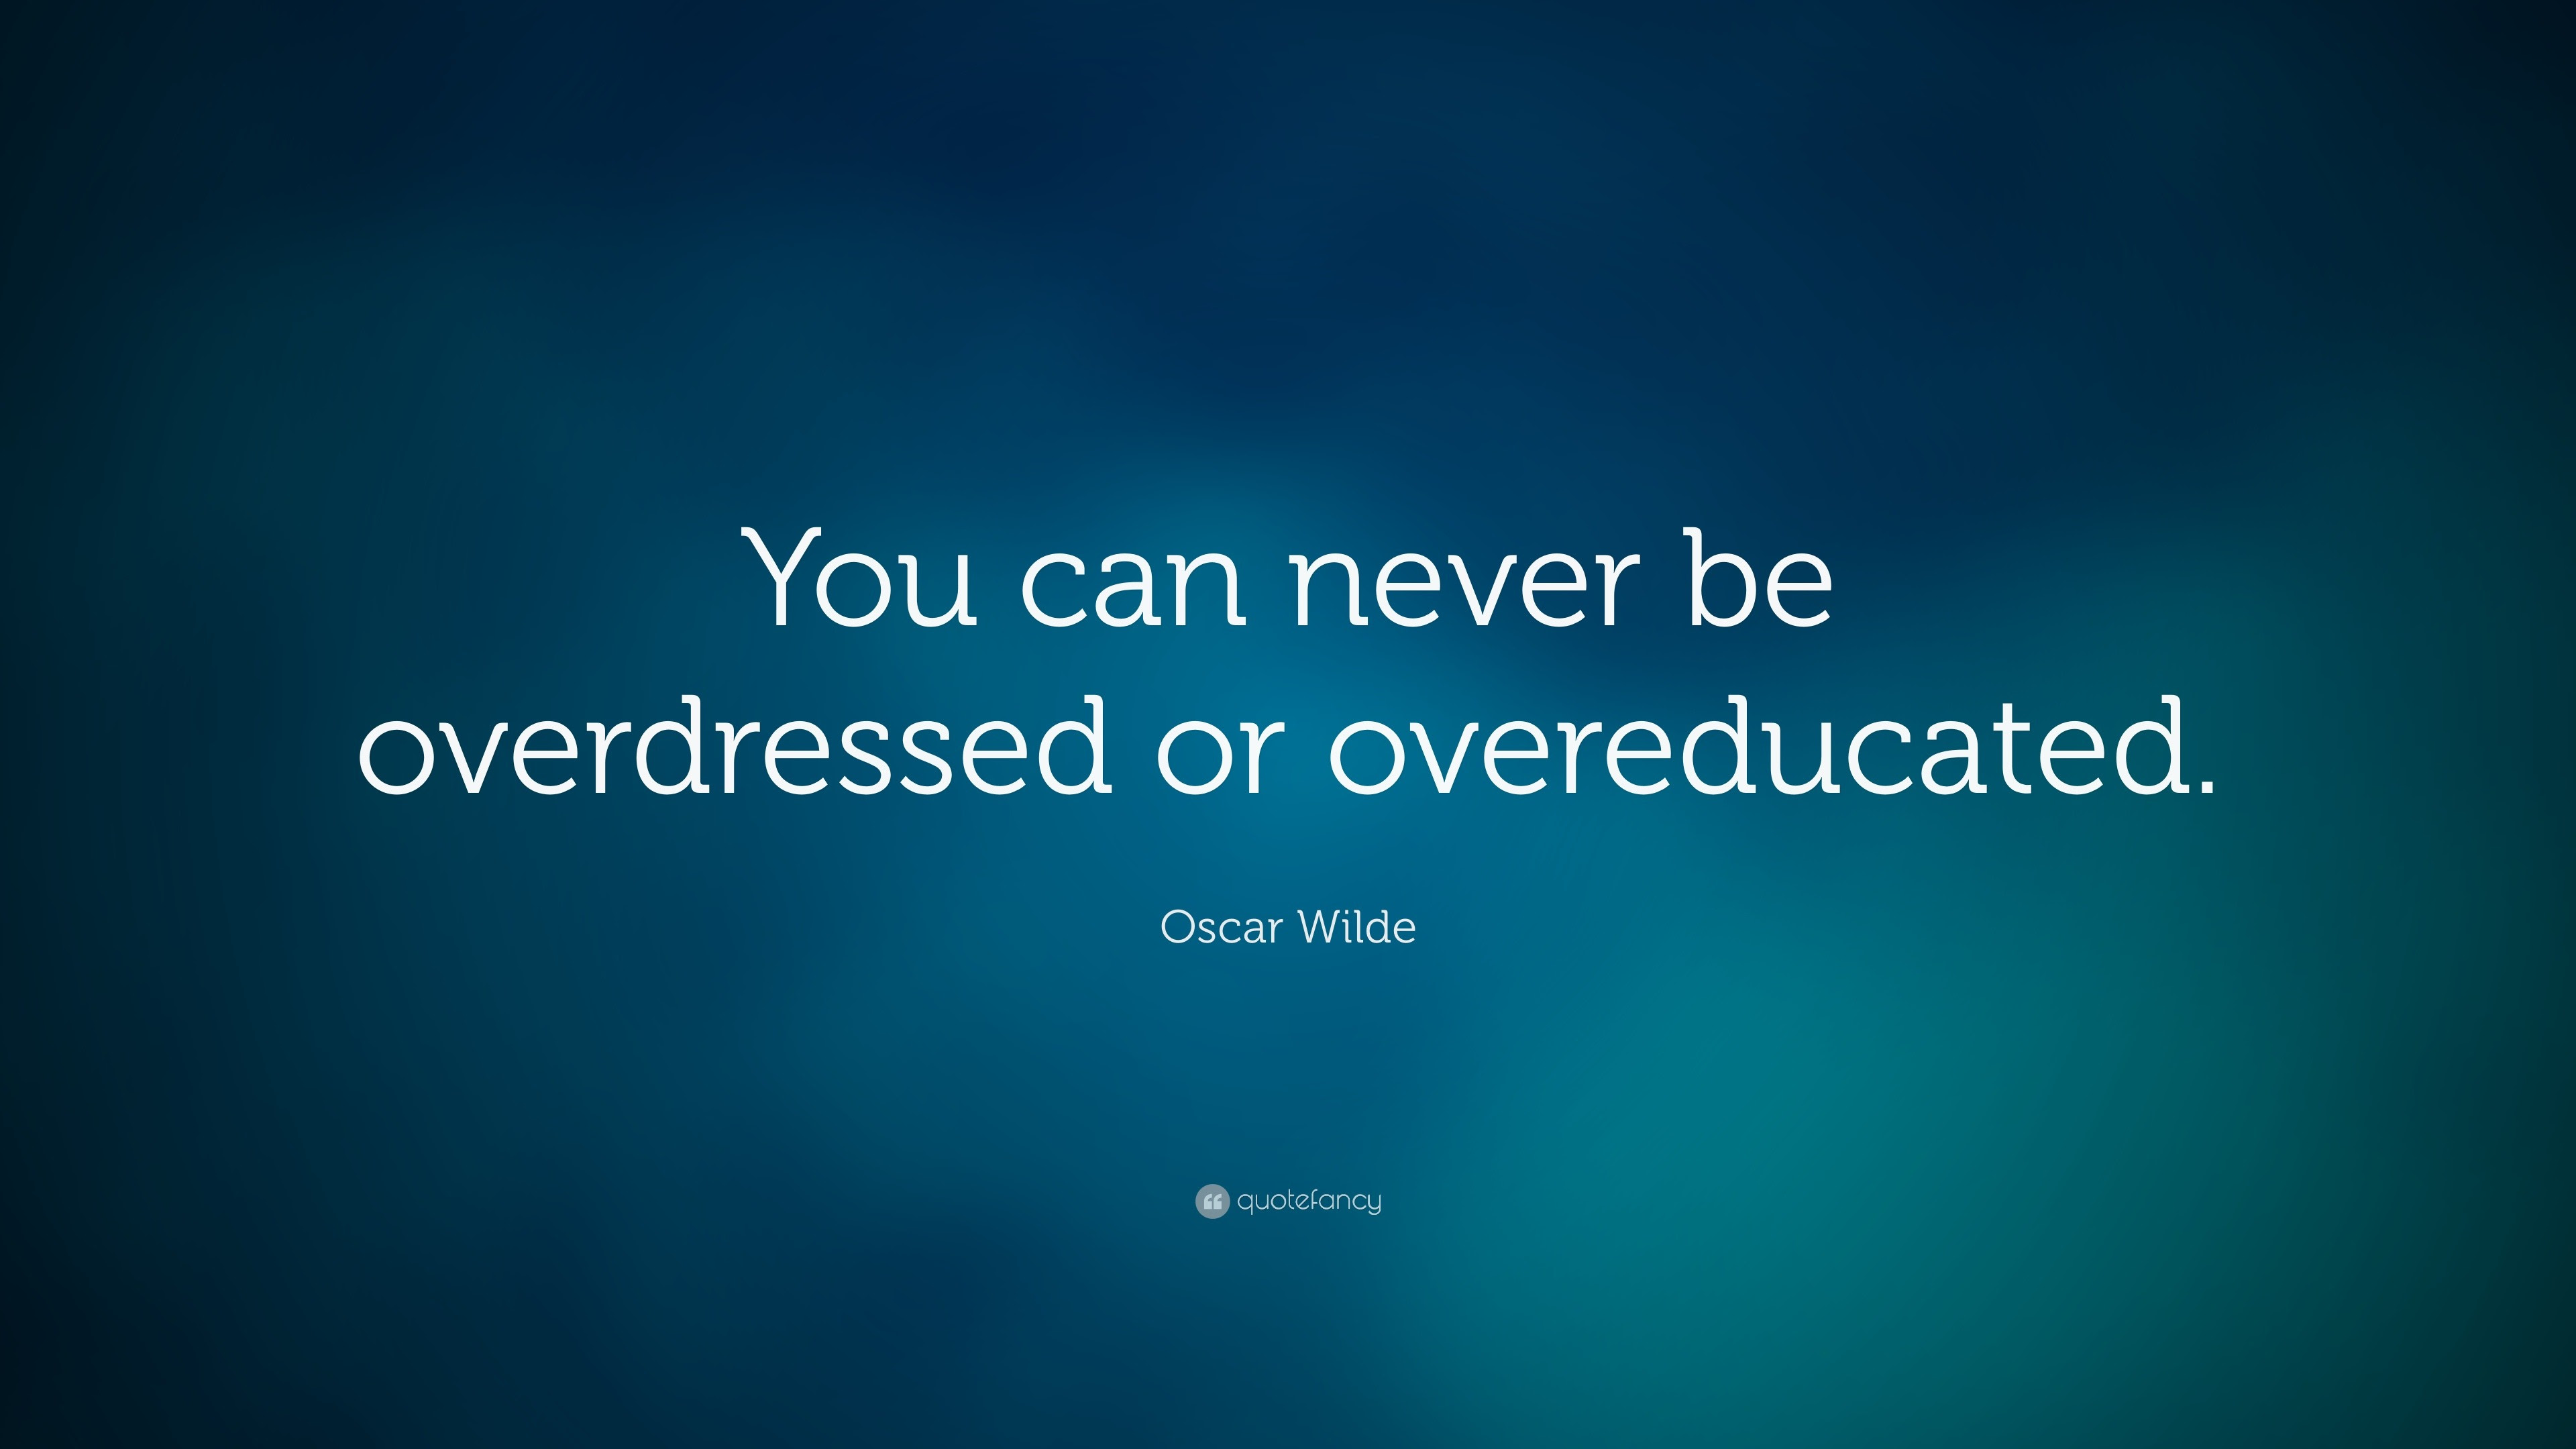 Oscar Wilde Quote: “You can never be overdressed or overeducated.” (3